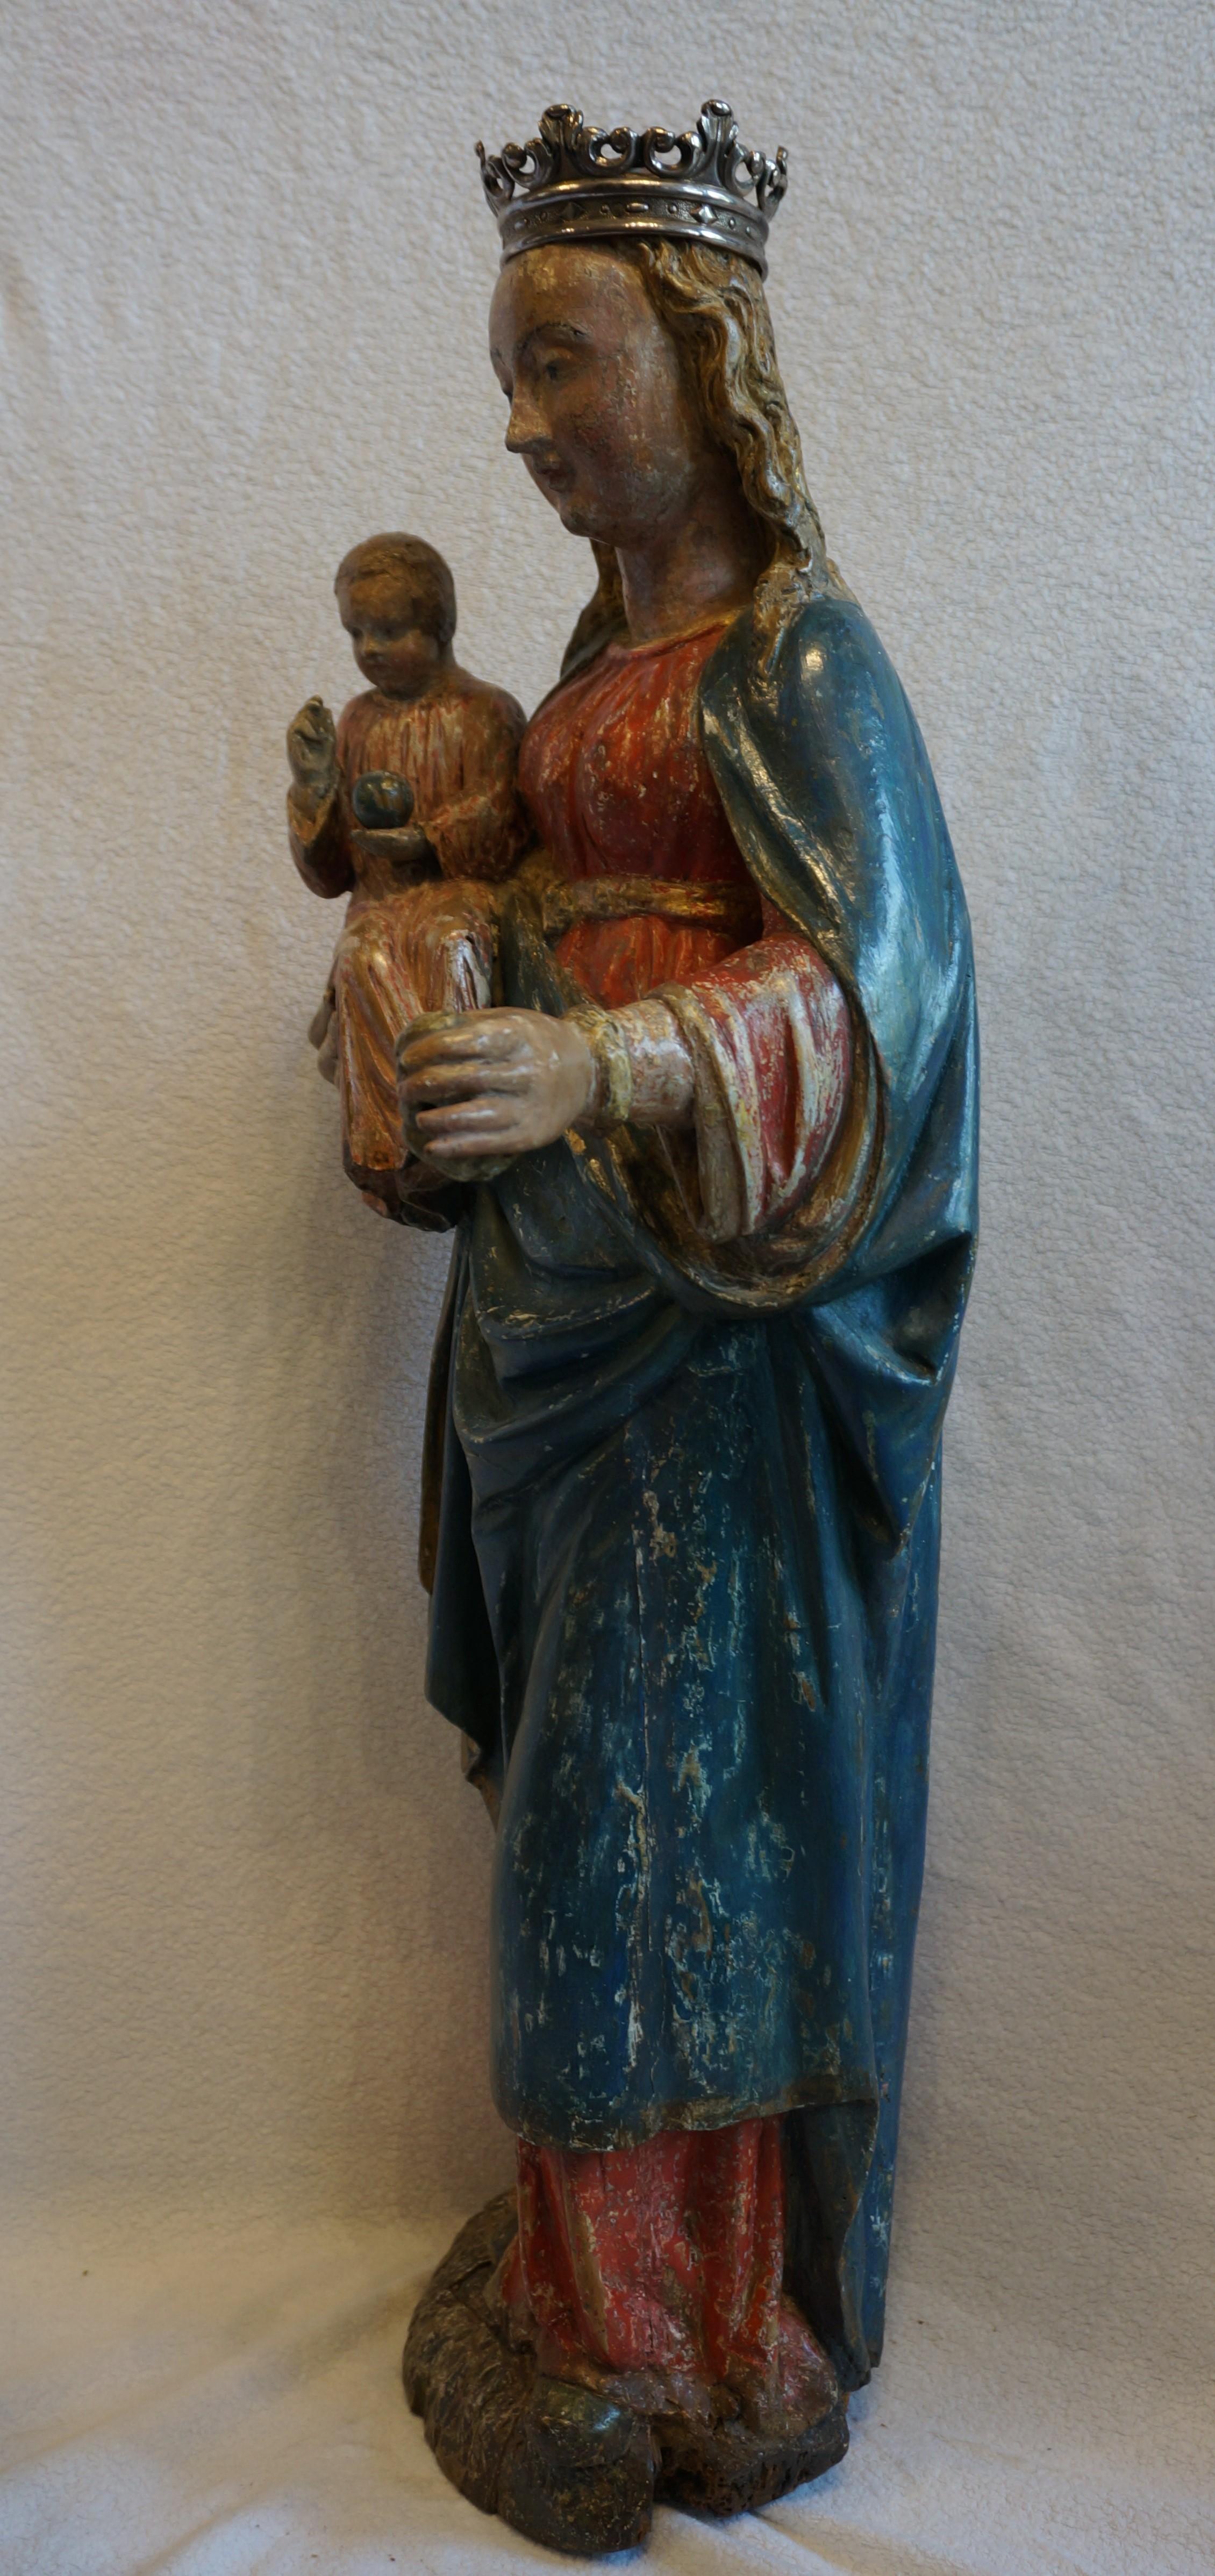 Antique Sculpture of Mary with the Child Jesus, Belgium, early 17th century For Sale 6